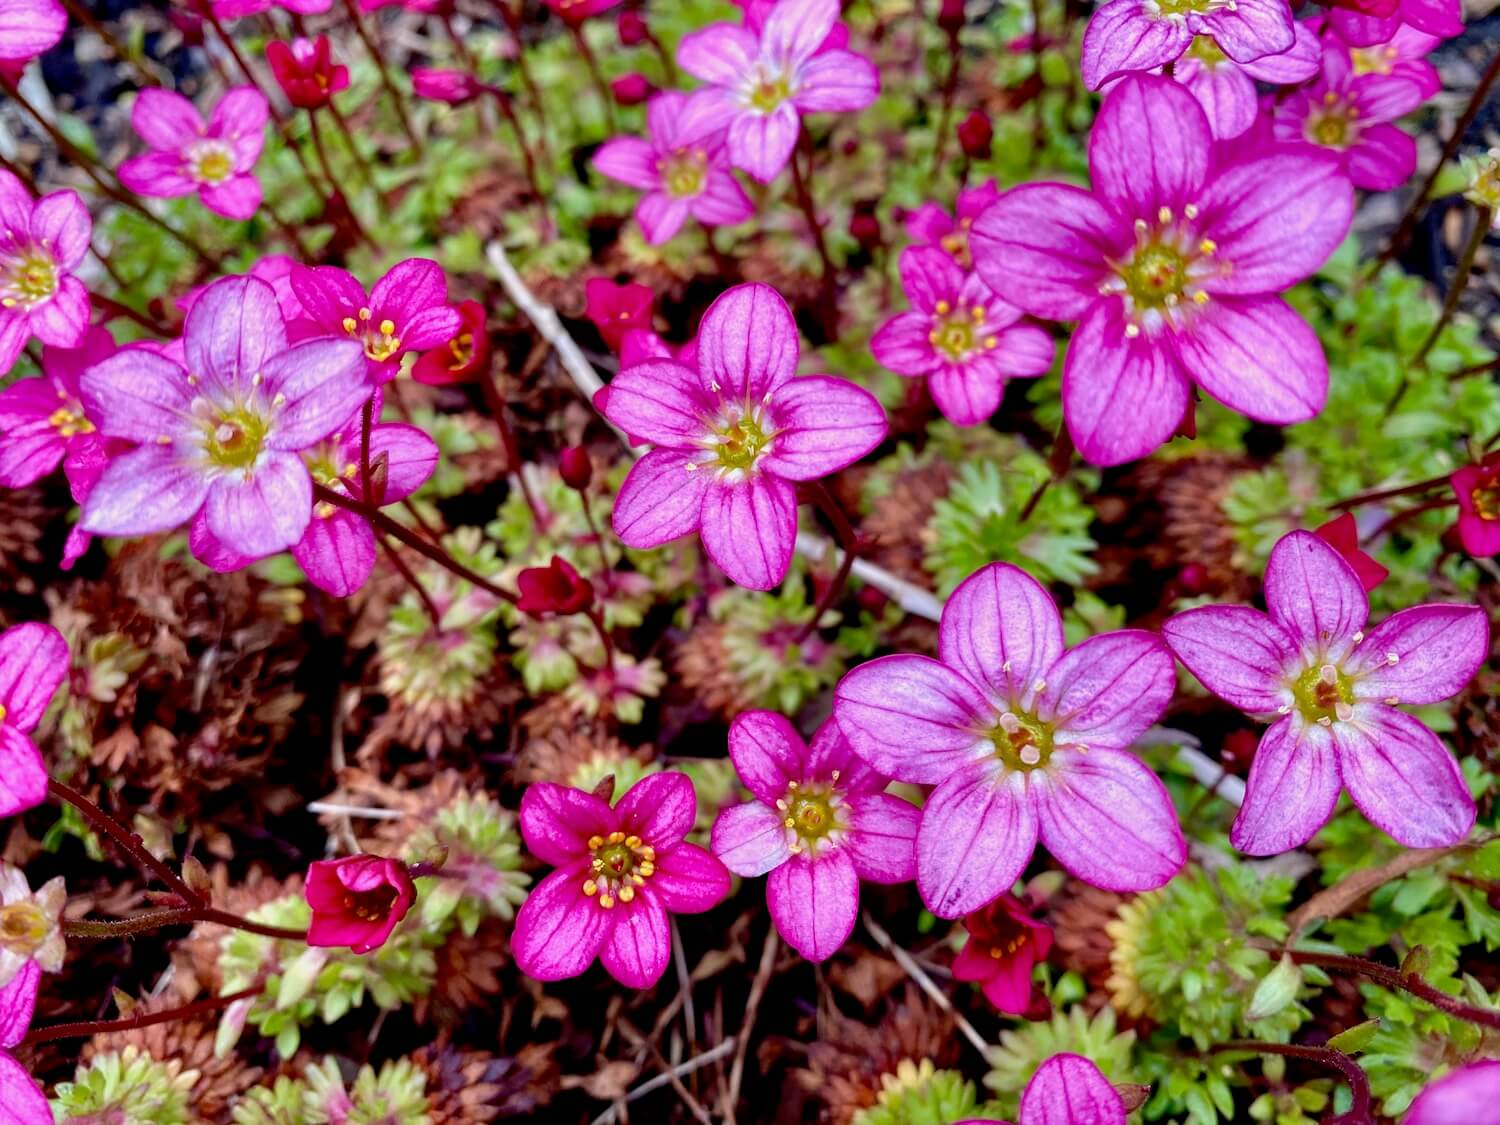 The tiny daisies provide abundant pop of purple color to signal the begging of the spring flowering season. The flowers each have five main purple-pink petals with nine pistols in the center calling out to nearby bees. the blossoms are about five inches off the ground, where the green and reddish leaves hold the base of the plant together.